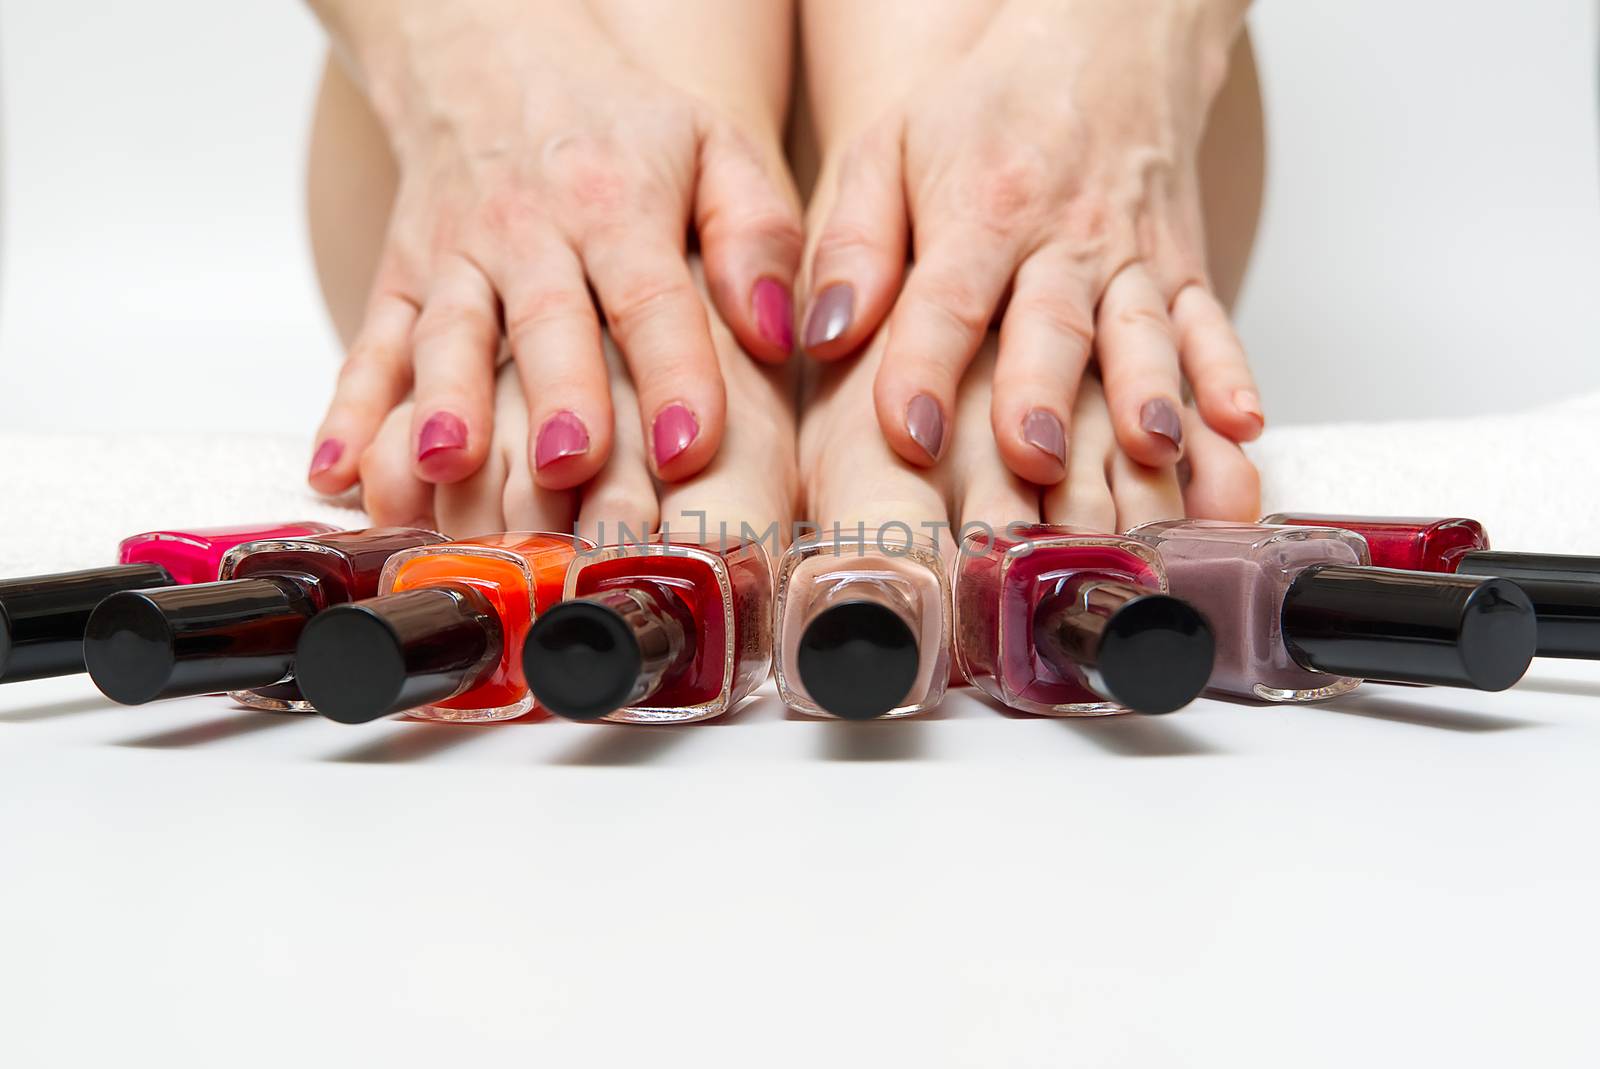 Woman at home spa doing pedicure to herself in white background, close-up. by PhotoTime